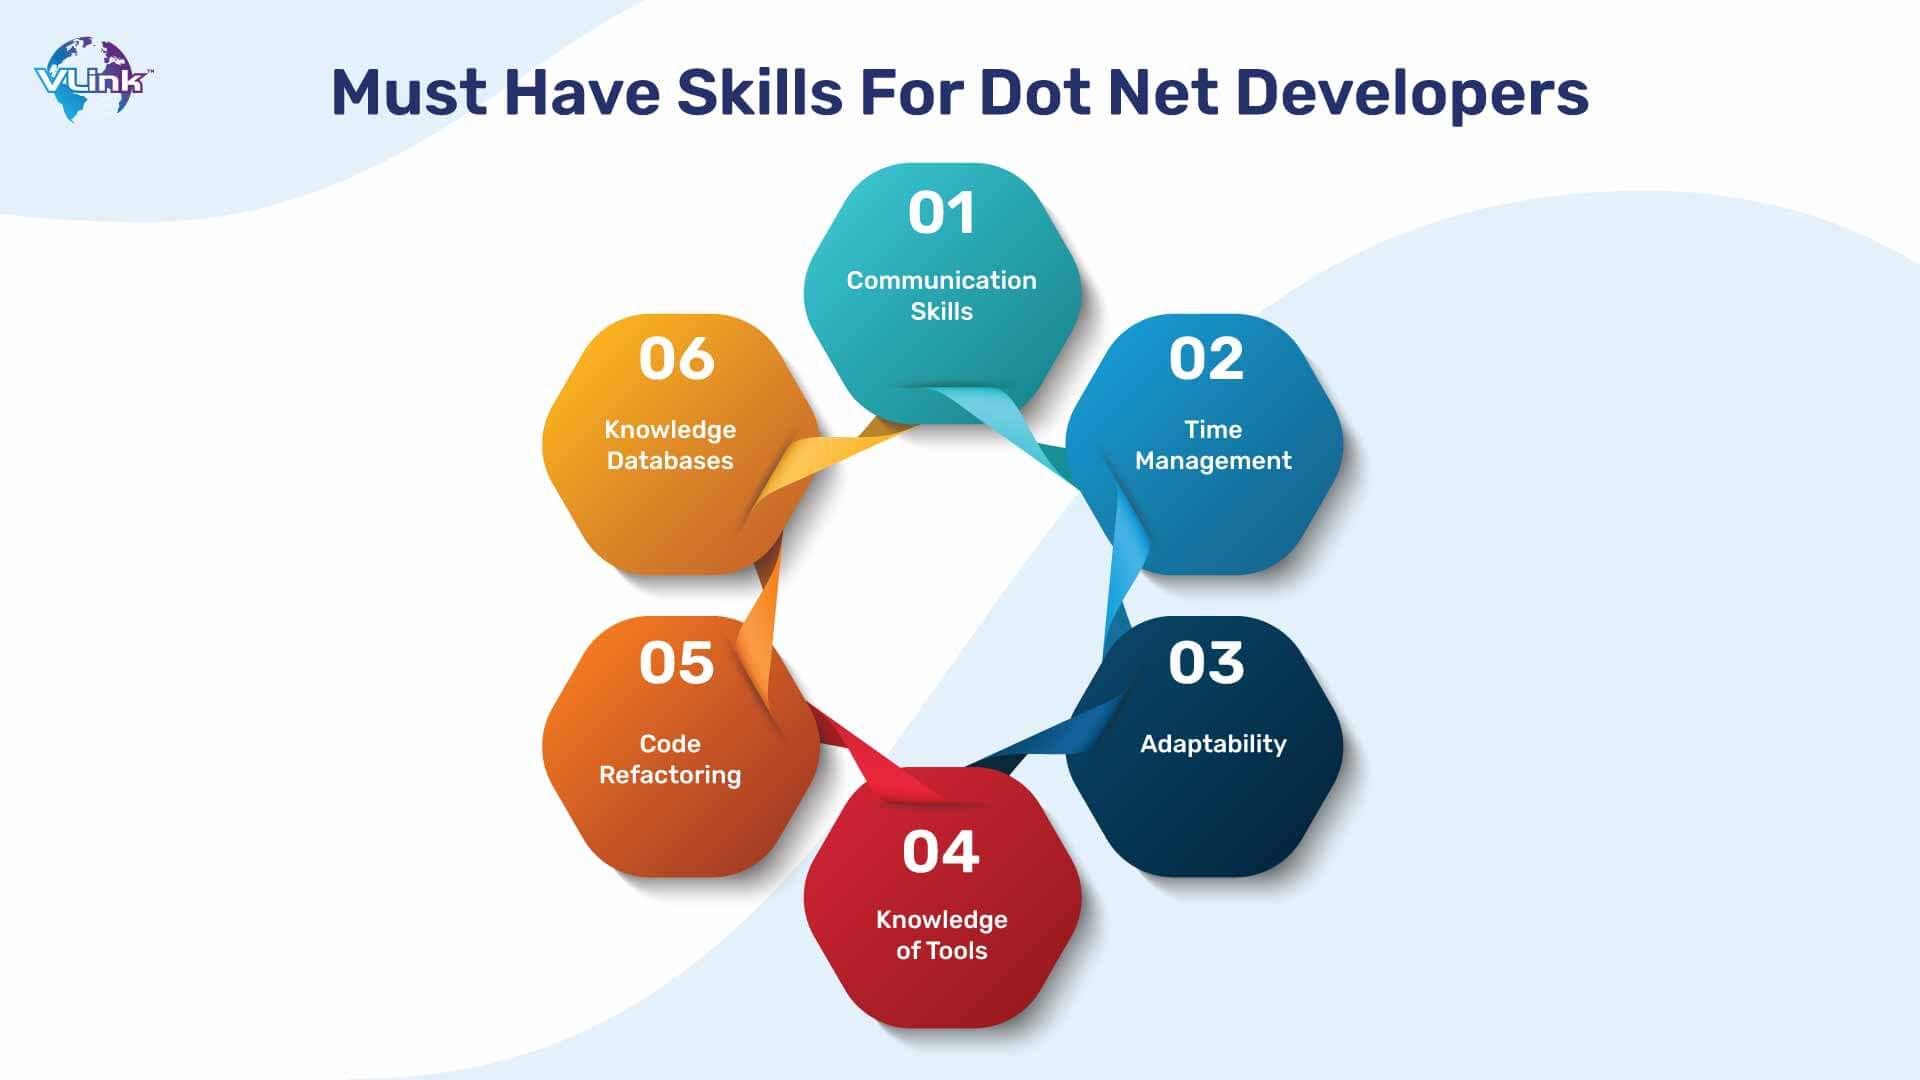 Must-Have Skills For .NET Developers